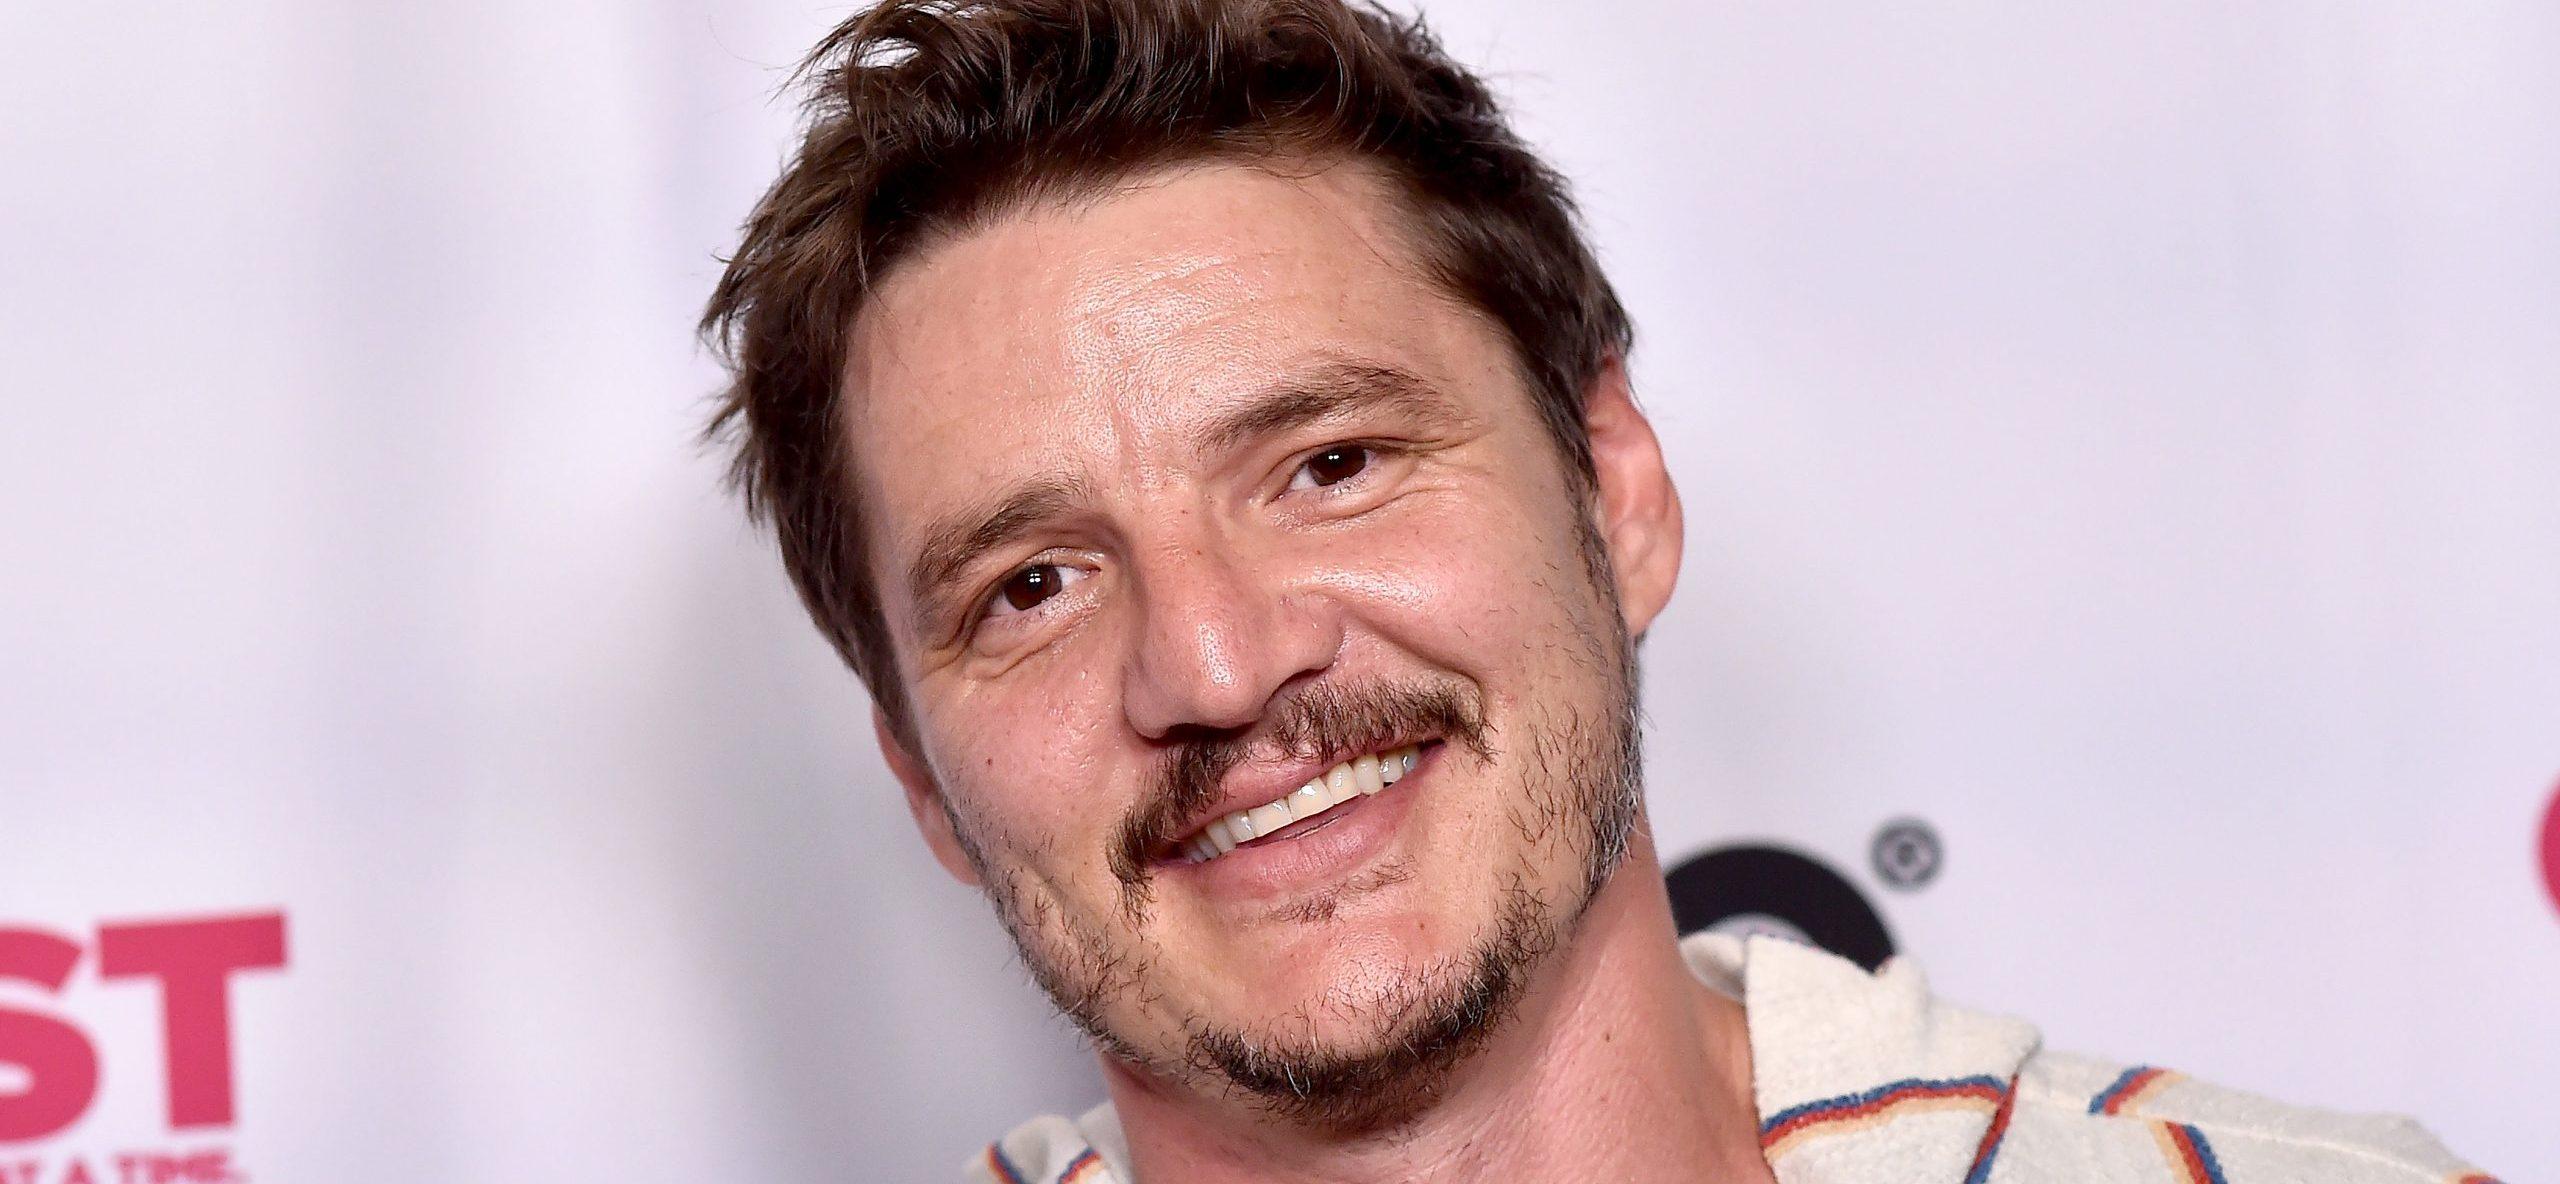 The Last of Us Star Pedro Pascal Weighs In On New Casting